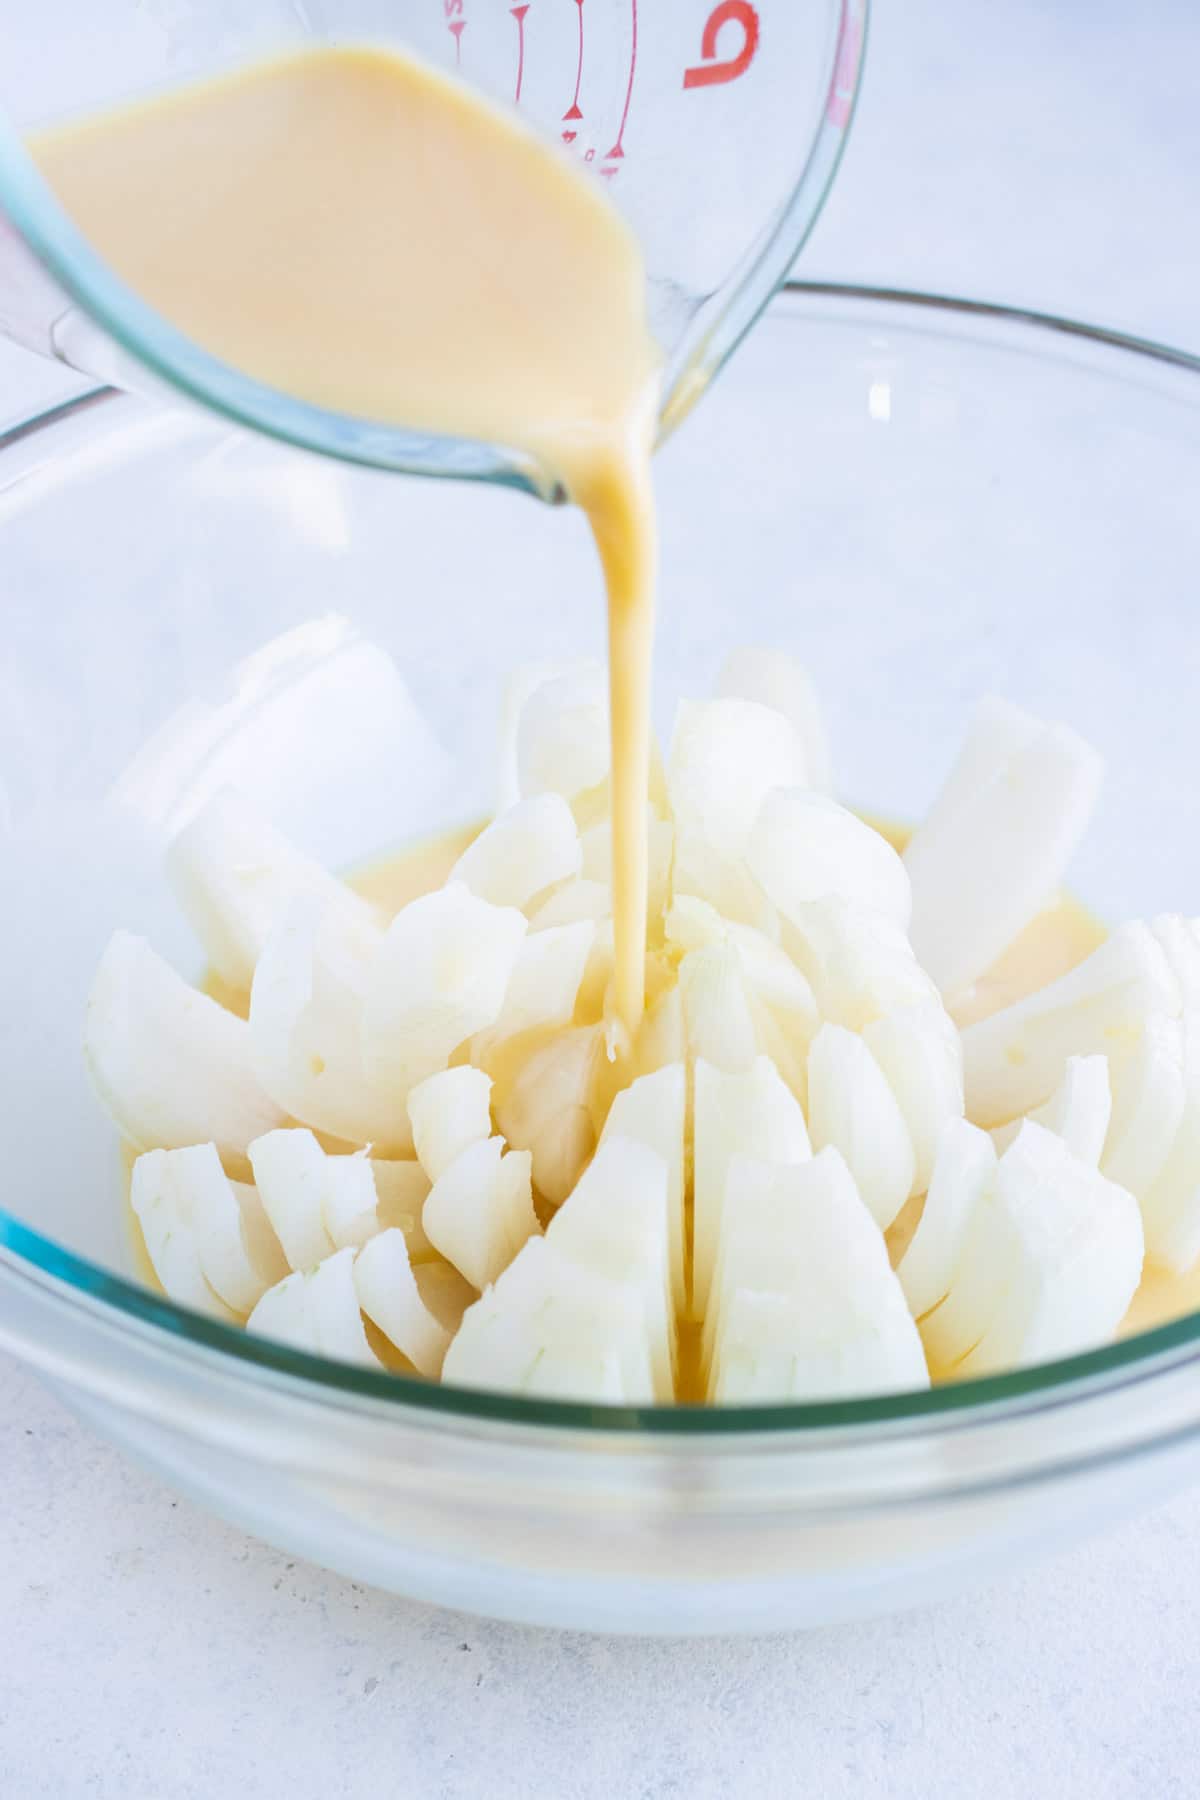 Cut onion in a bowl is covered in the milk and egg mixture.